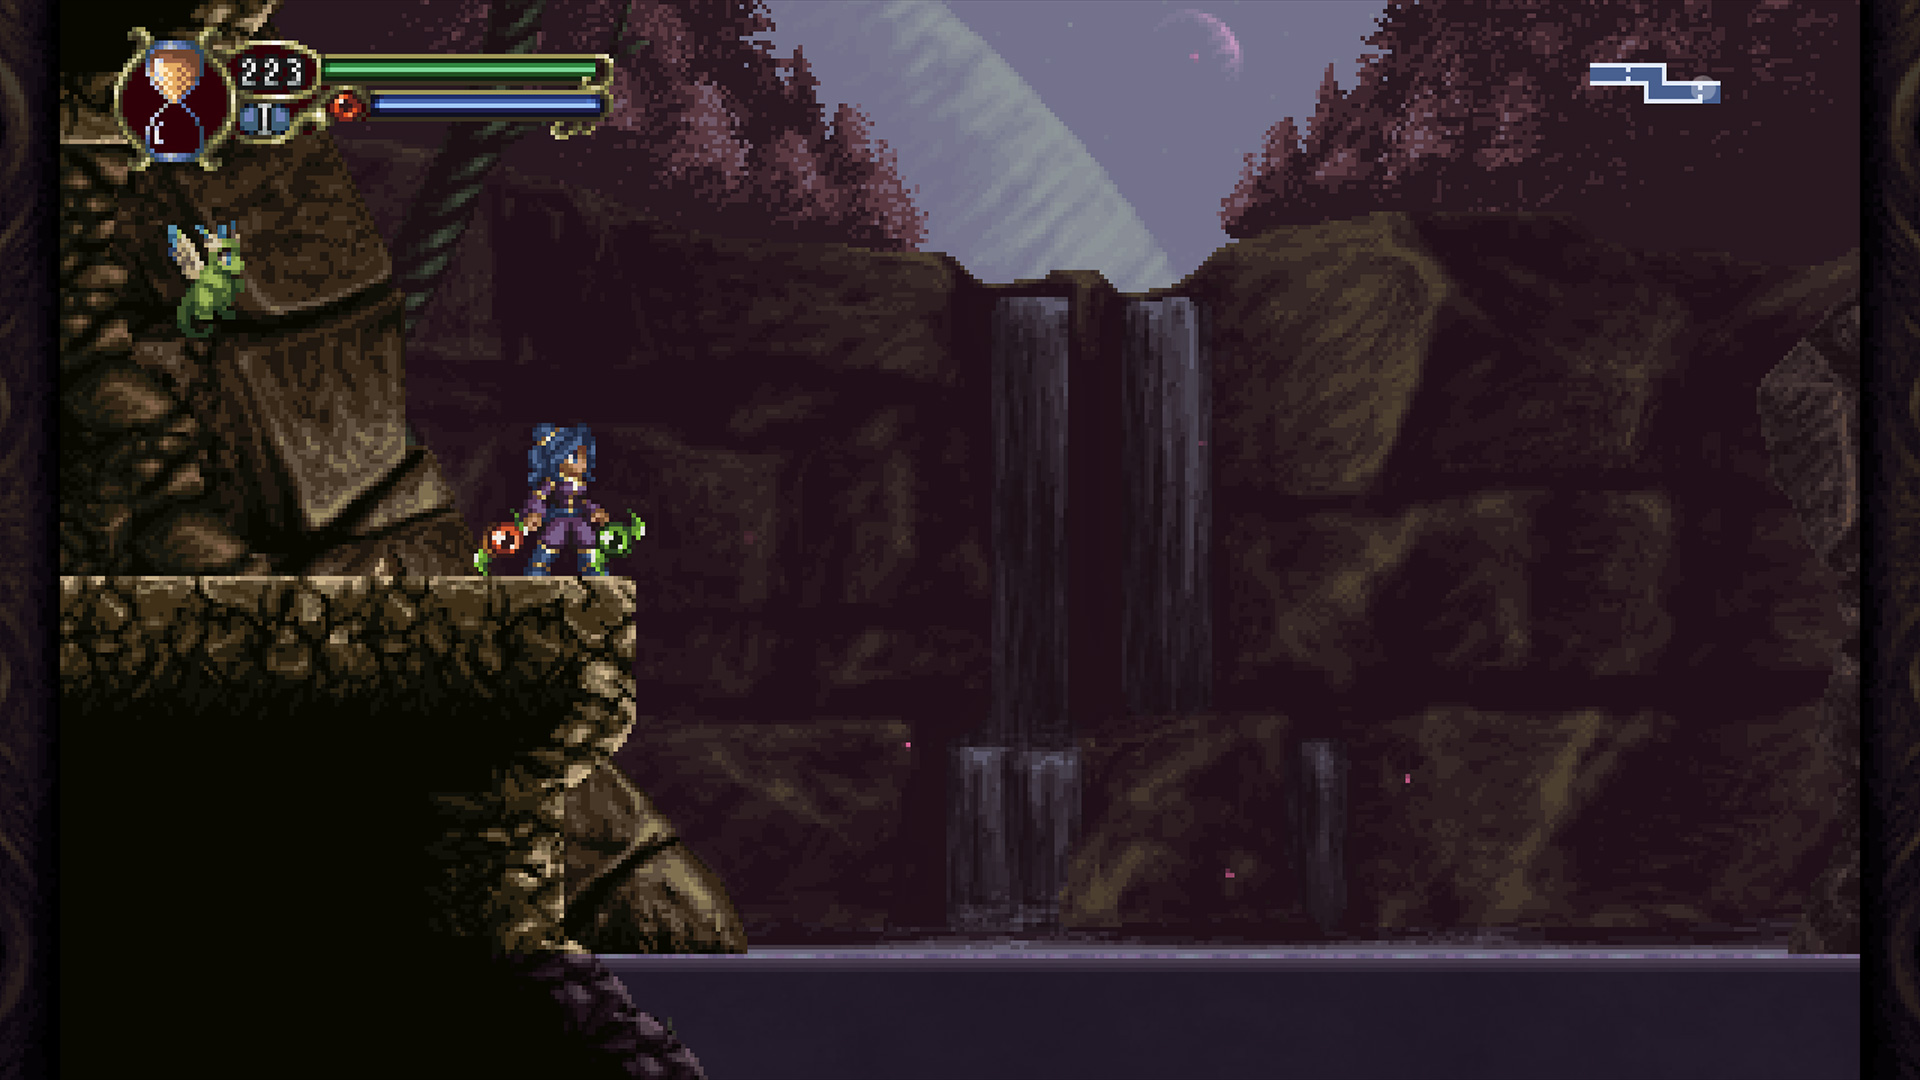 Save 60% on Timespinner on Steam